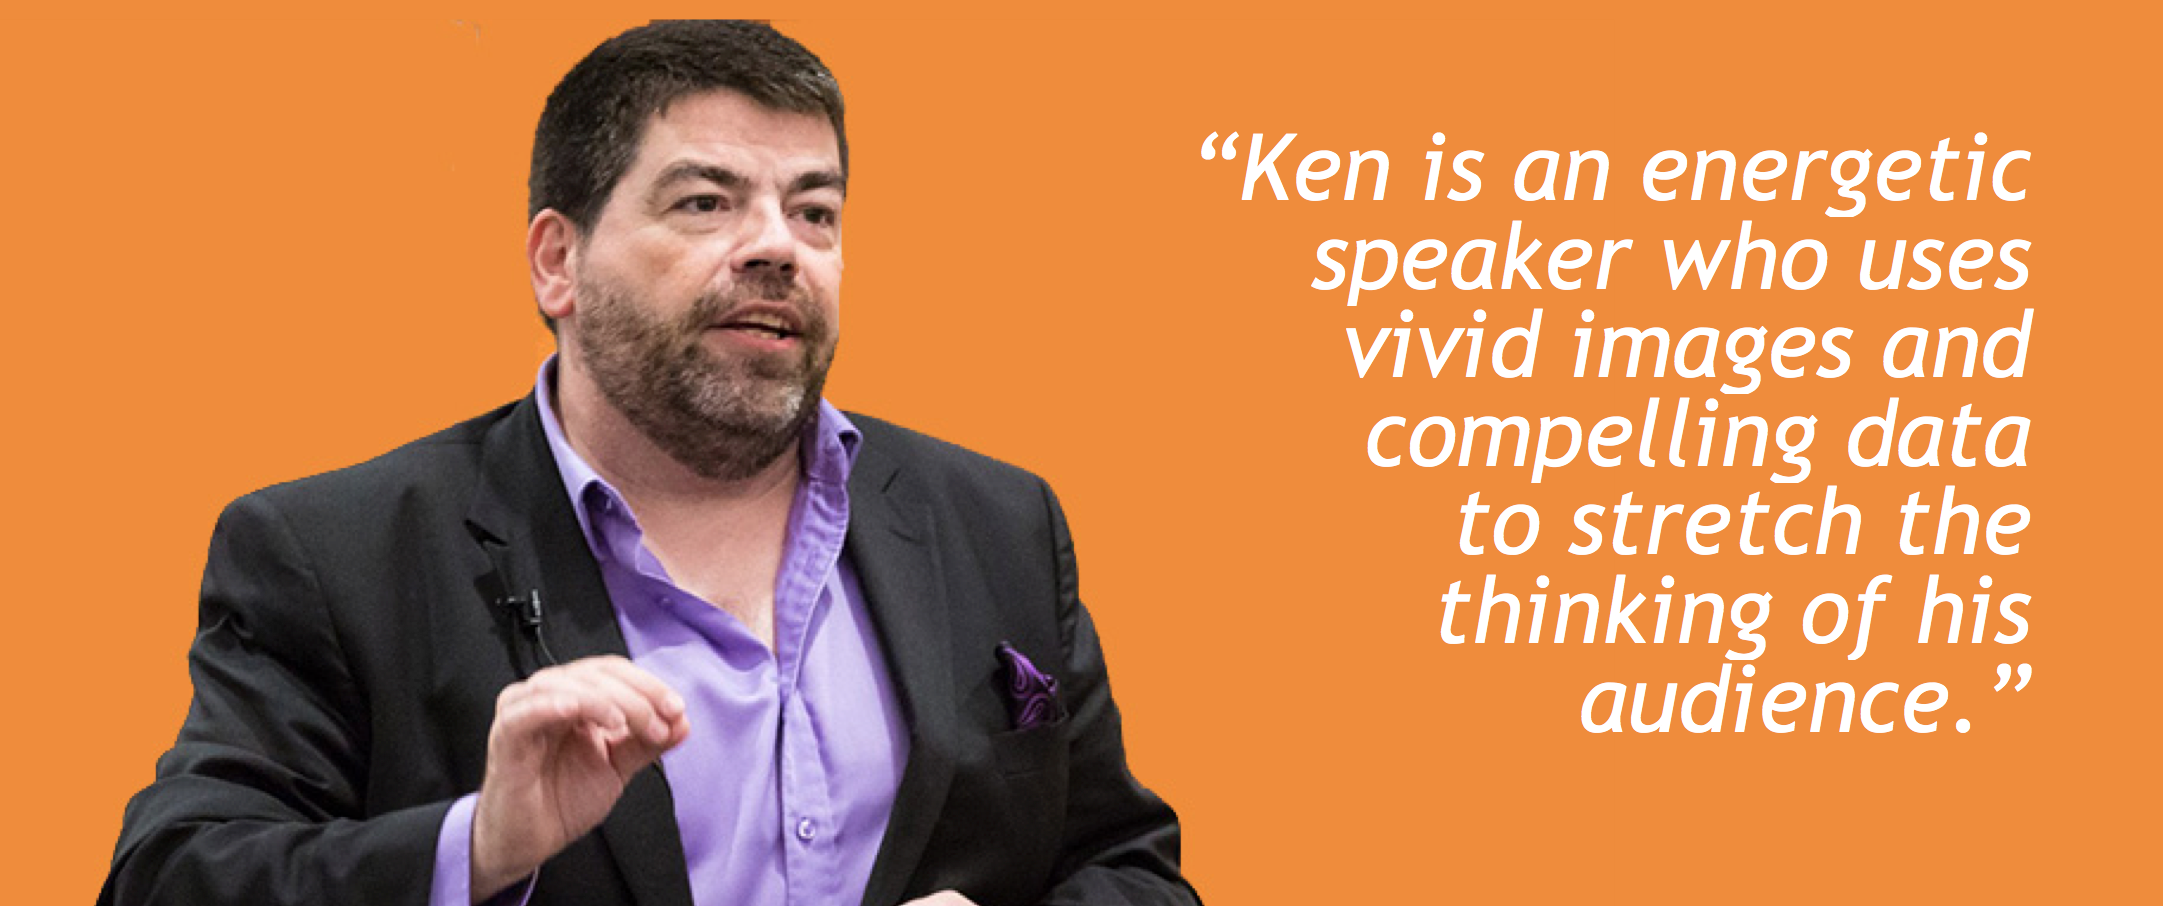 Ken Steele is an energetic speaker who stretches the thinking of his audience